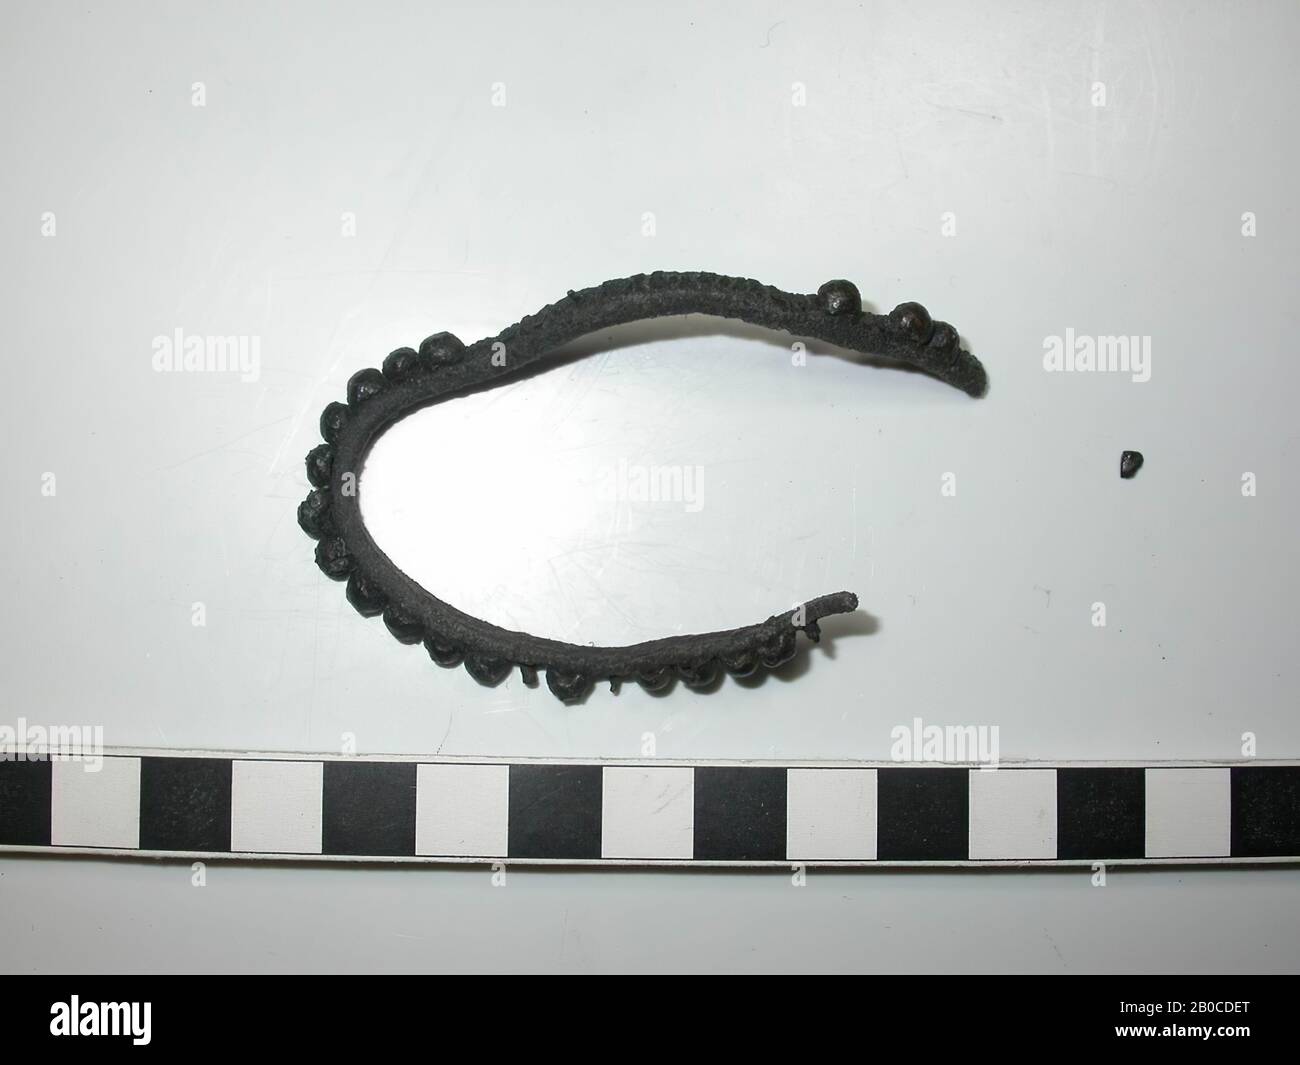 Fragment leather belt with fittings. On the belt are 19 studs of lead with cap of copper alloy and 4 some decorative nails. About 11 decorative nails with a cap are missing on the belt. The color of the batter is dark gray to black because of the corrosion of the lead. There is no space between the caps and the fittings are as wide as the leather. The diameter of the batter is 0.45 - 0.5 cm and the thickness is 0.35 cm., Belt with batter, organic, leather, metal, copper alloy and lead, Belt: L: 13.4 cm, B: 0 , 45 cm, D: 0.3 cm, end of the 14th century 1350-1400, the Netherlands, South Holland Stock Photo